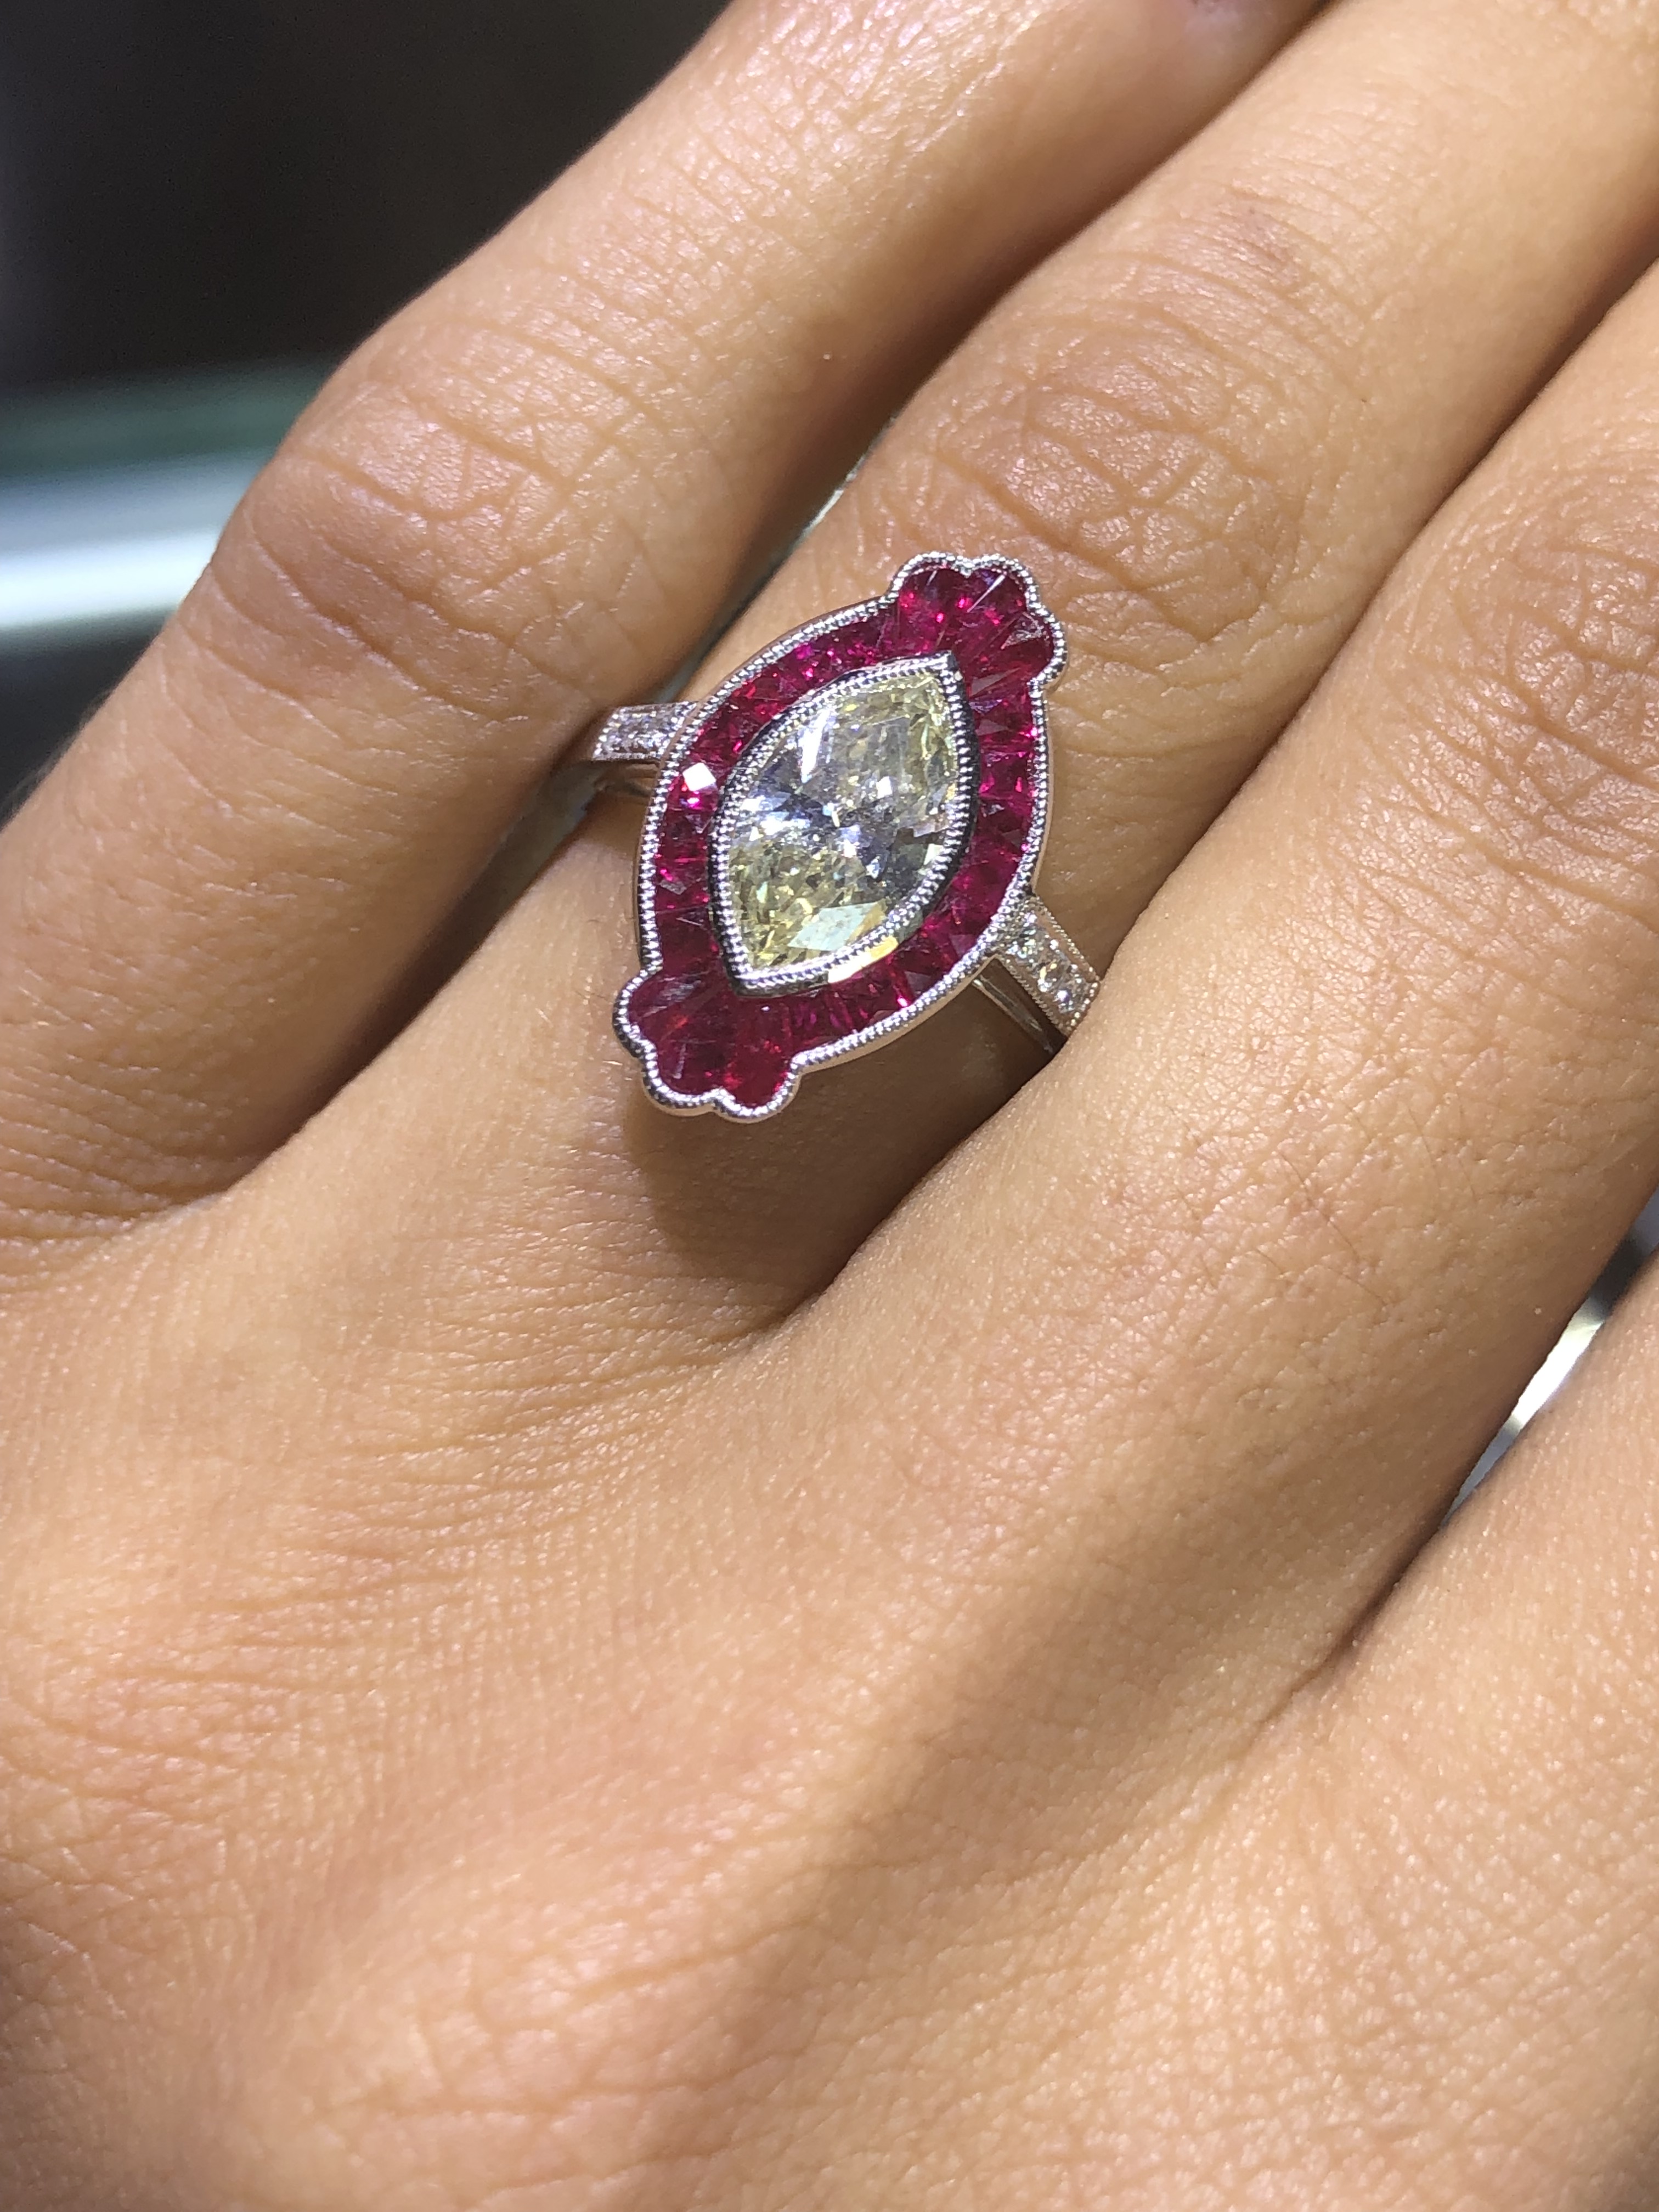 ruby and diamond ring like Orlando Bloom proposed with 